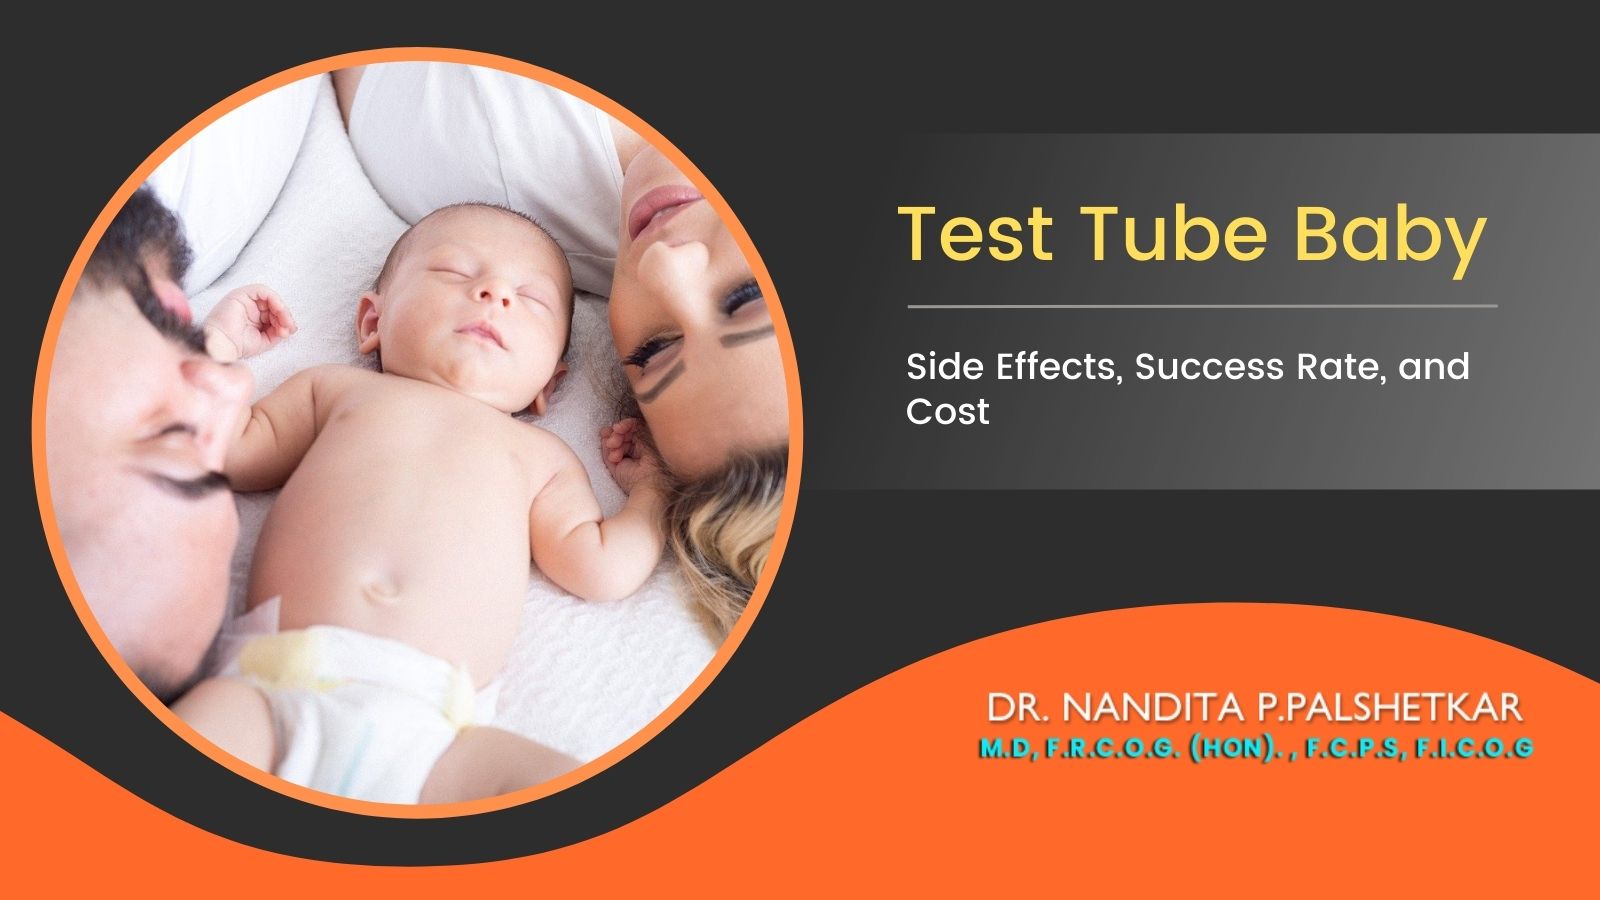 Test Tube Baby: Side Effects, Success Rate, and Cost